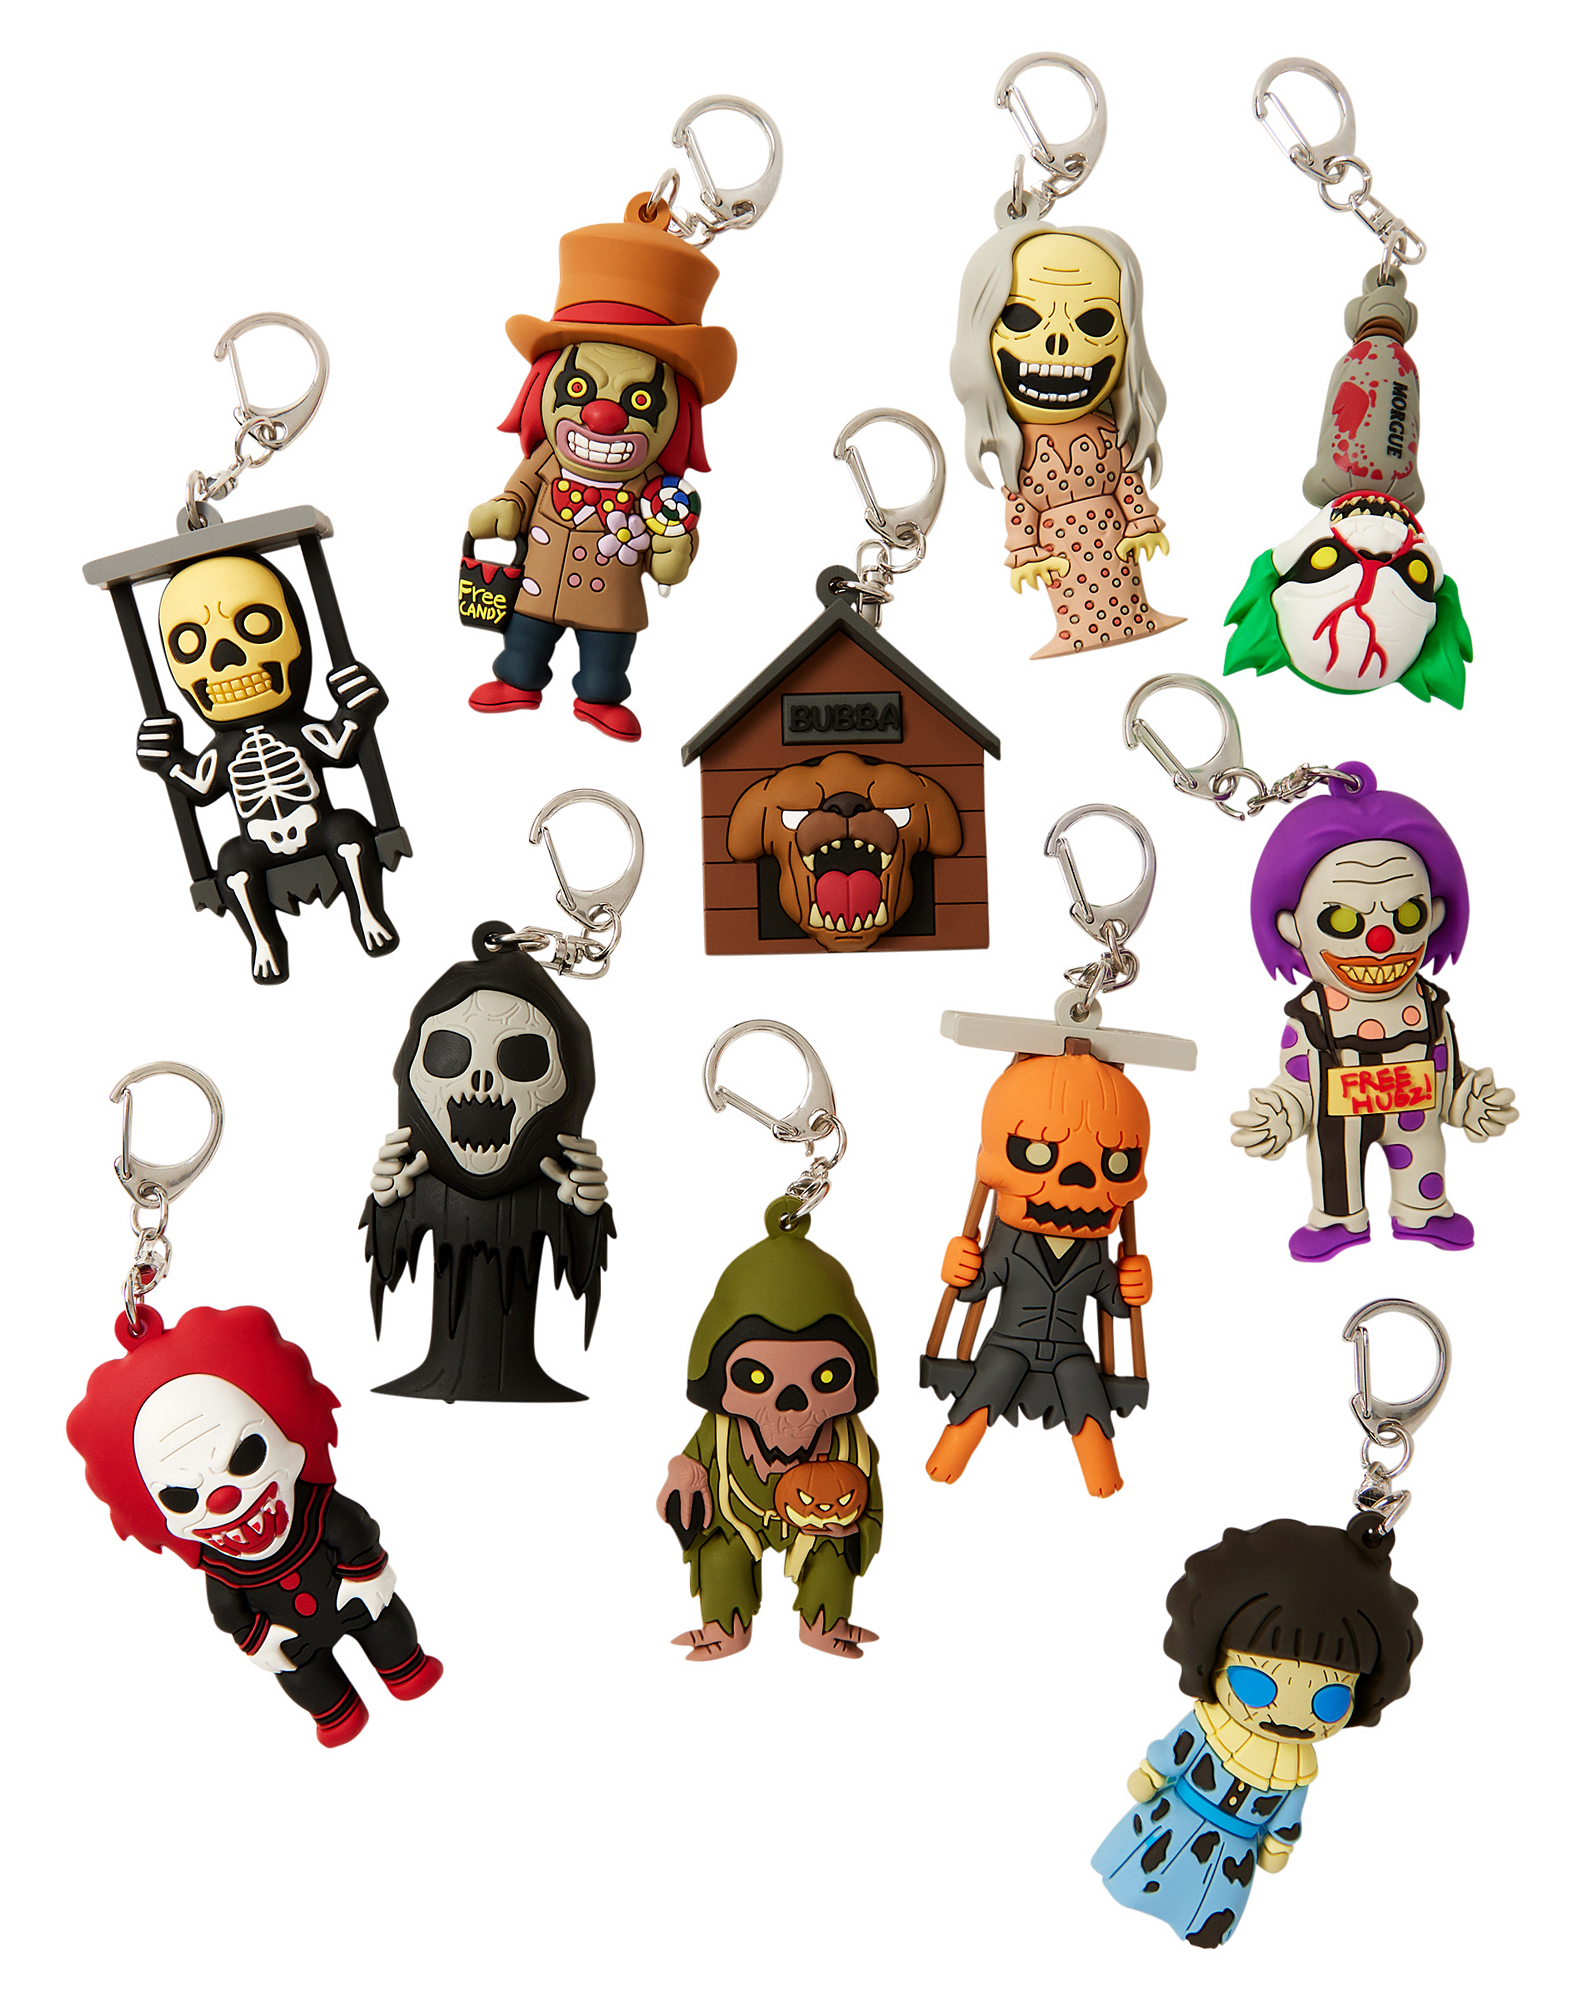 https://static.wikia.nocookie.net/spirit-halloween-store/images/5/5e/01565902-a.png/revision/latest?cb=20220816001652